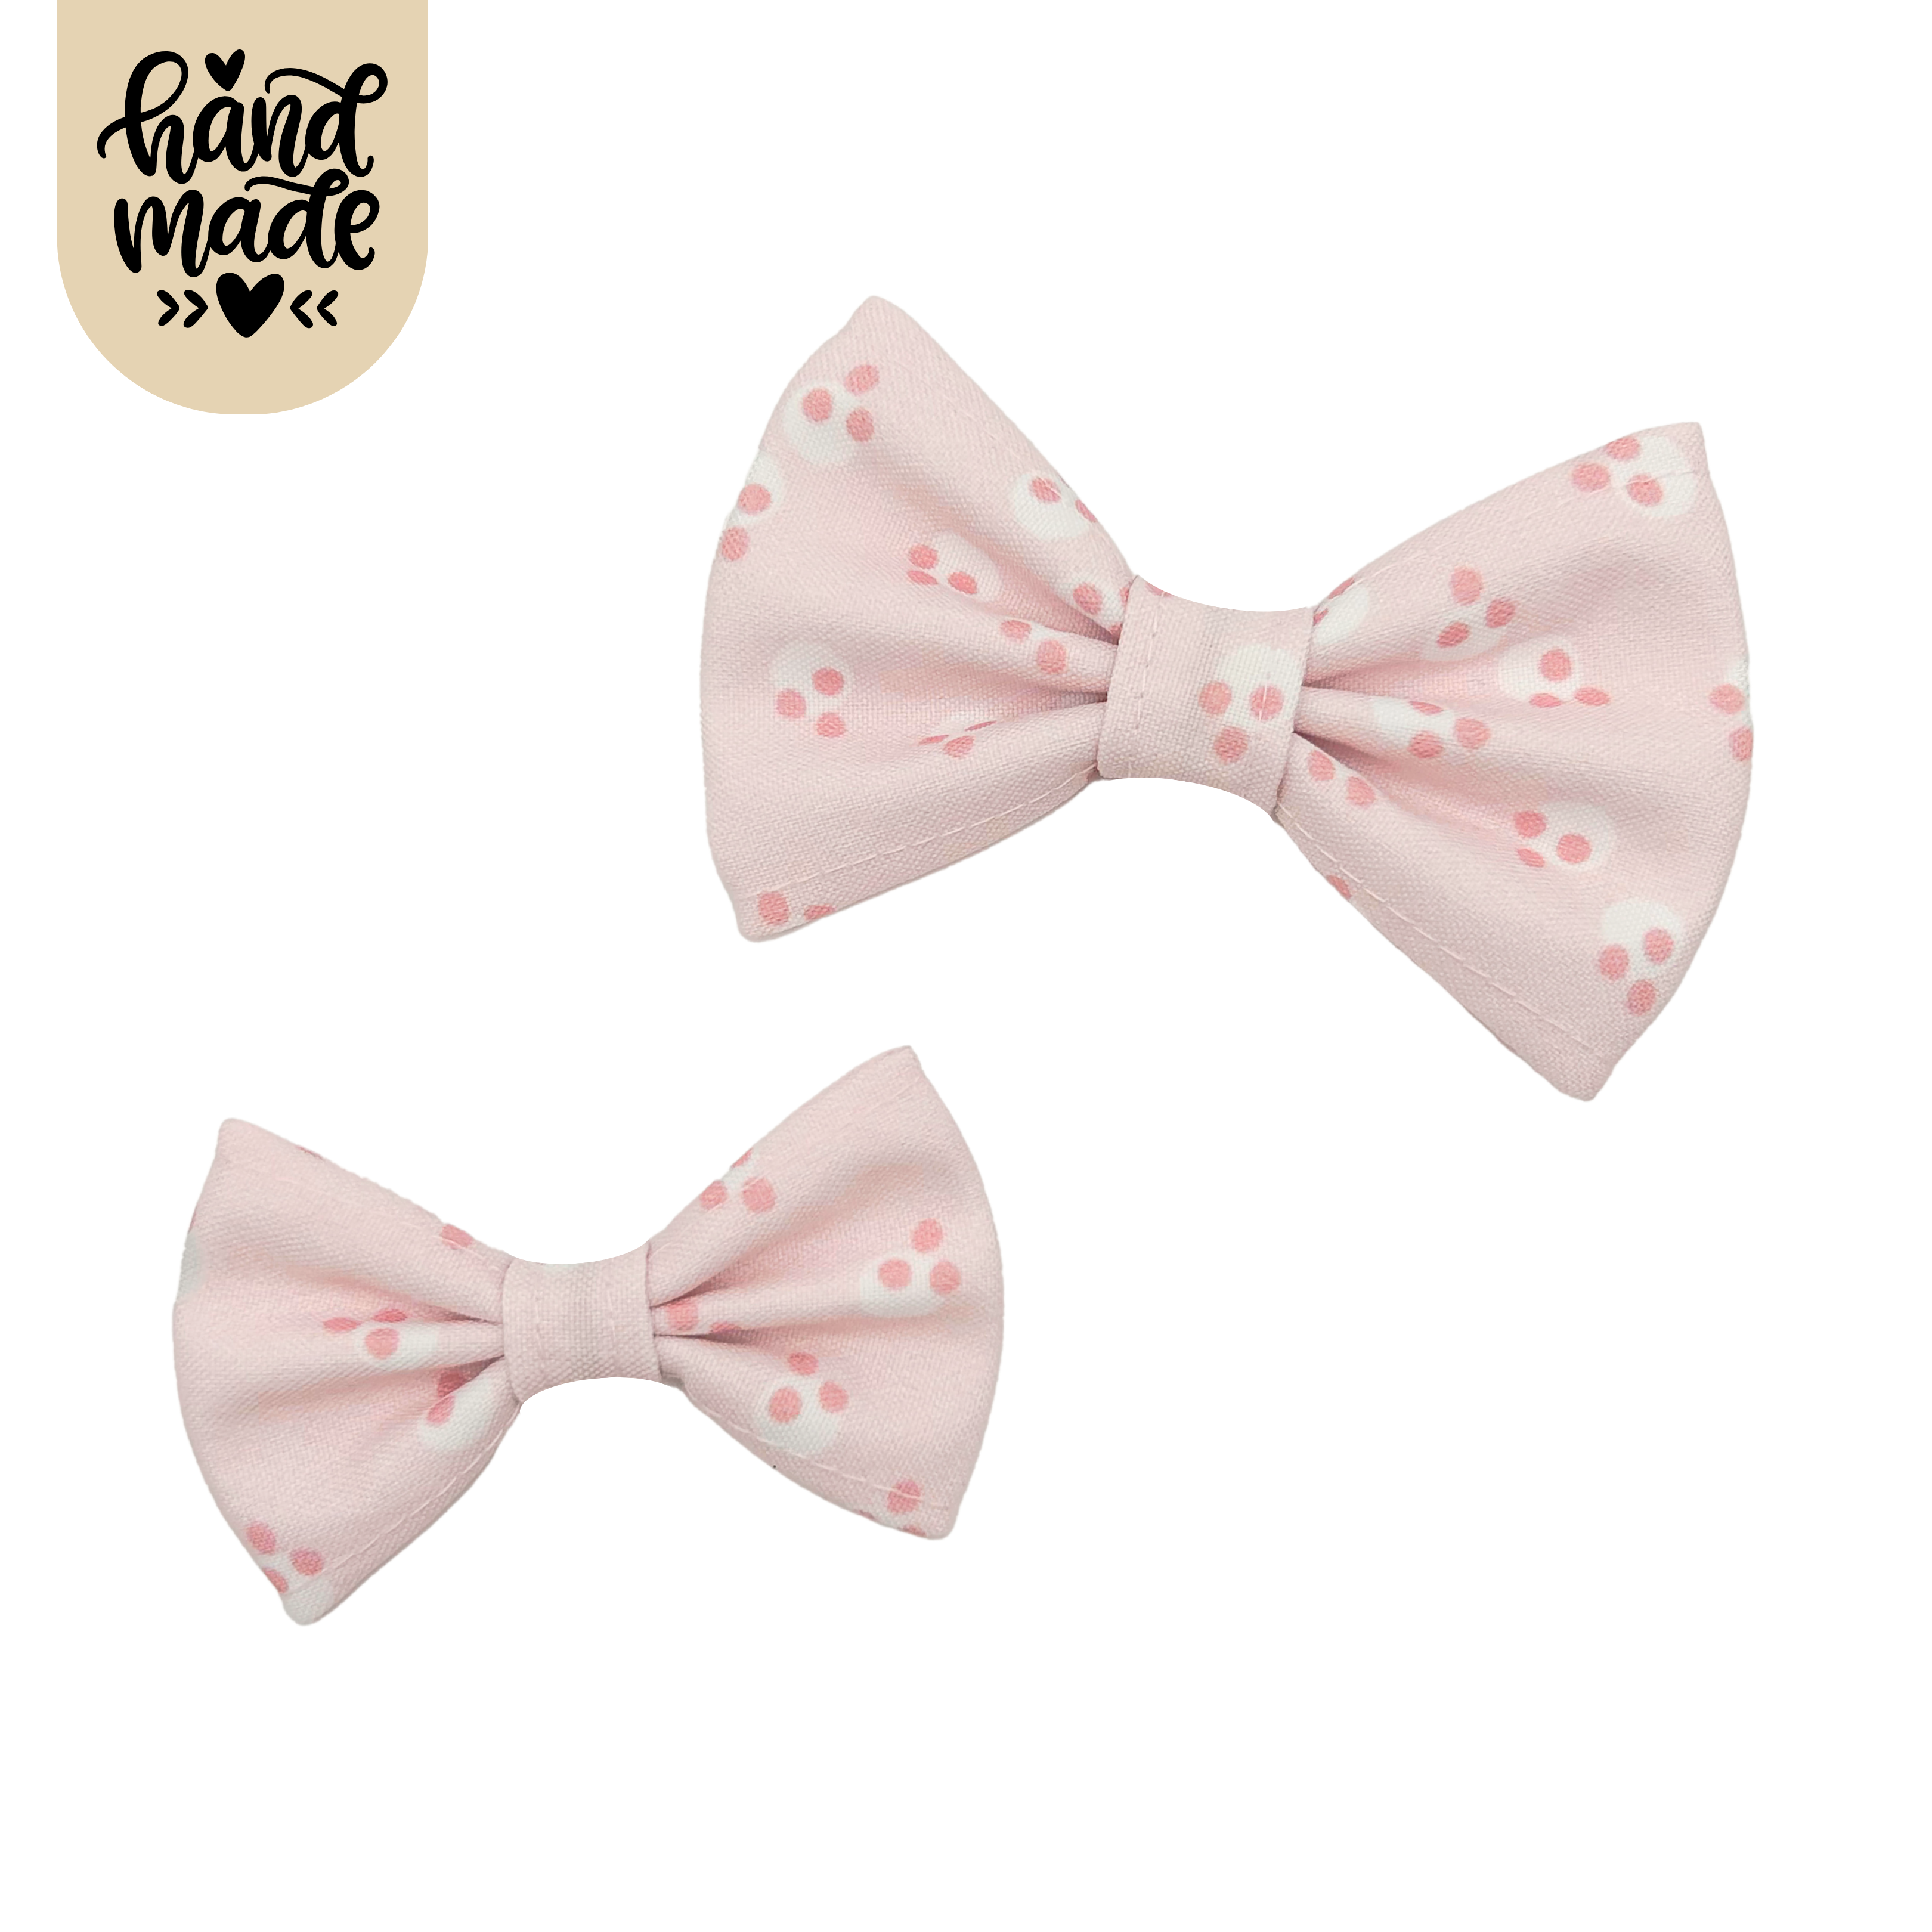 Bow Tie - Cotton Candy